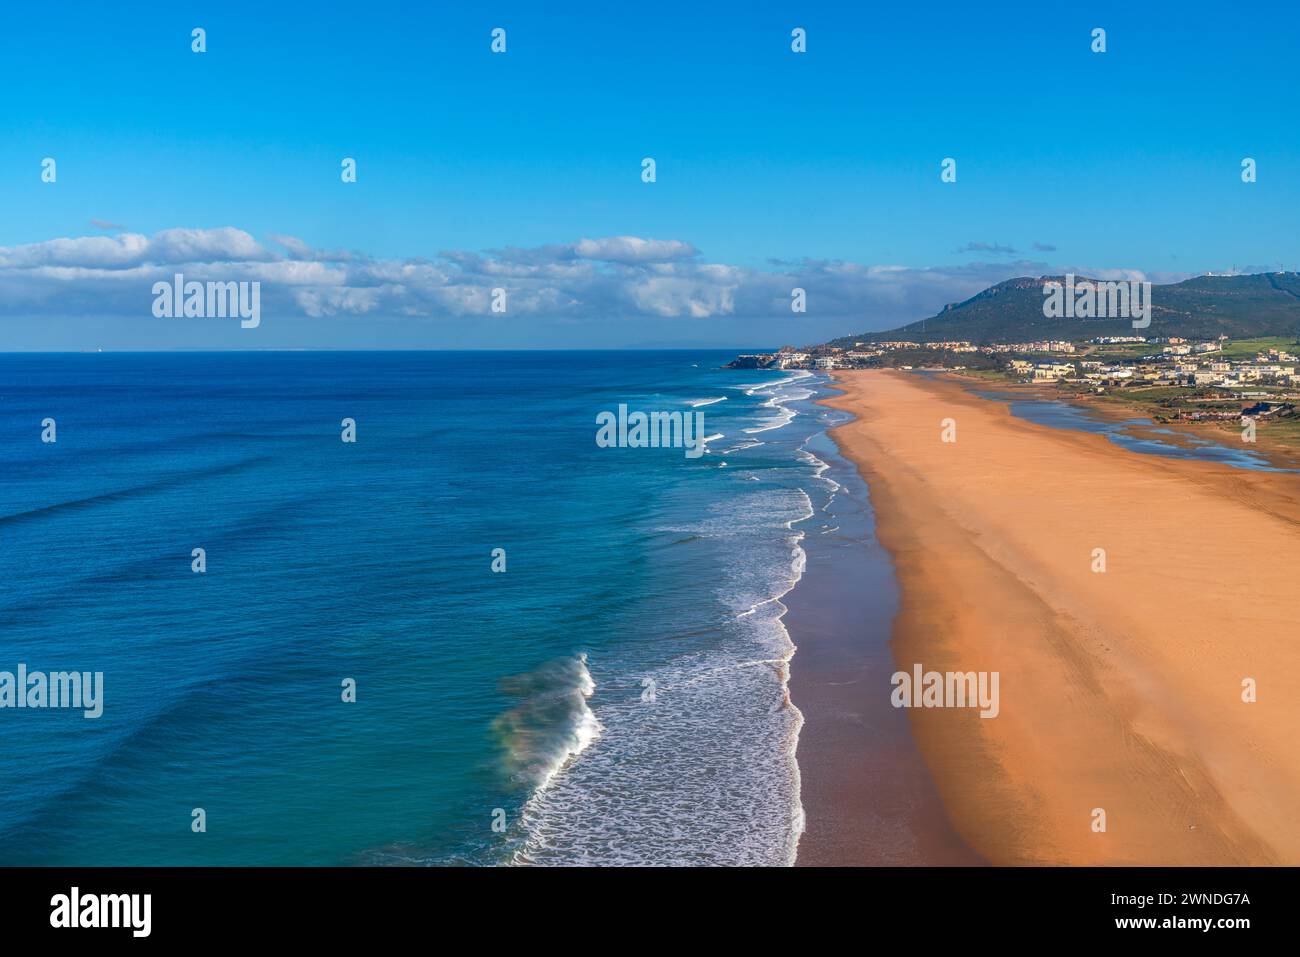 Aerial view of a beautiful beach on the Moroccan Atlantic Coast in Tanger, Morocco Stock Photo